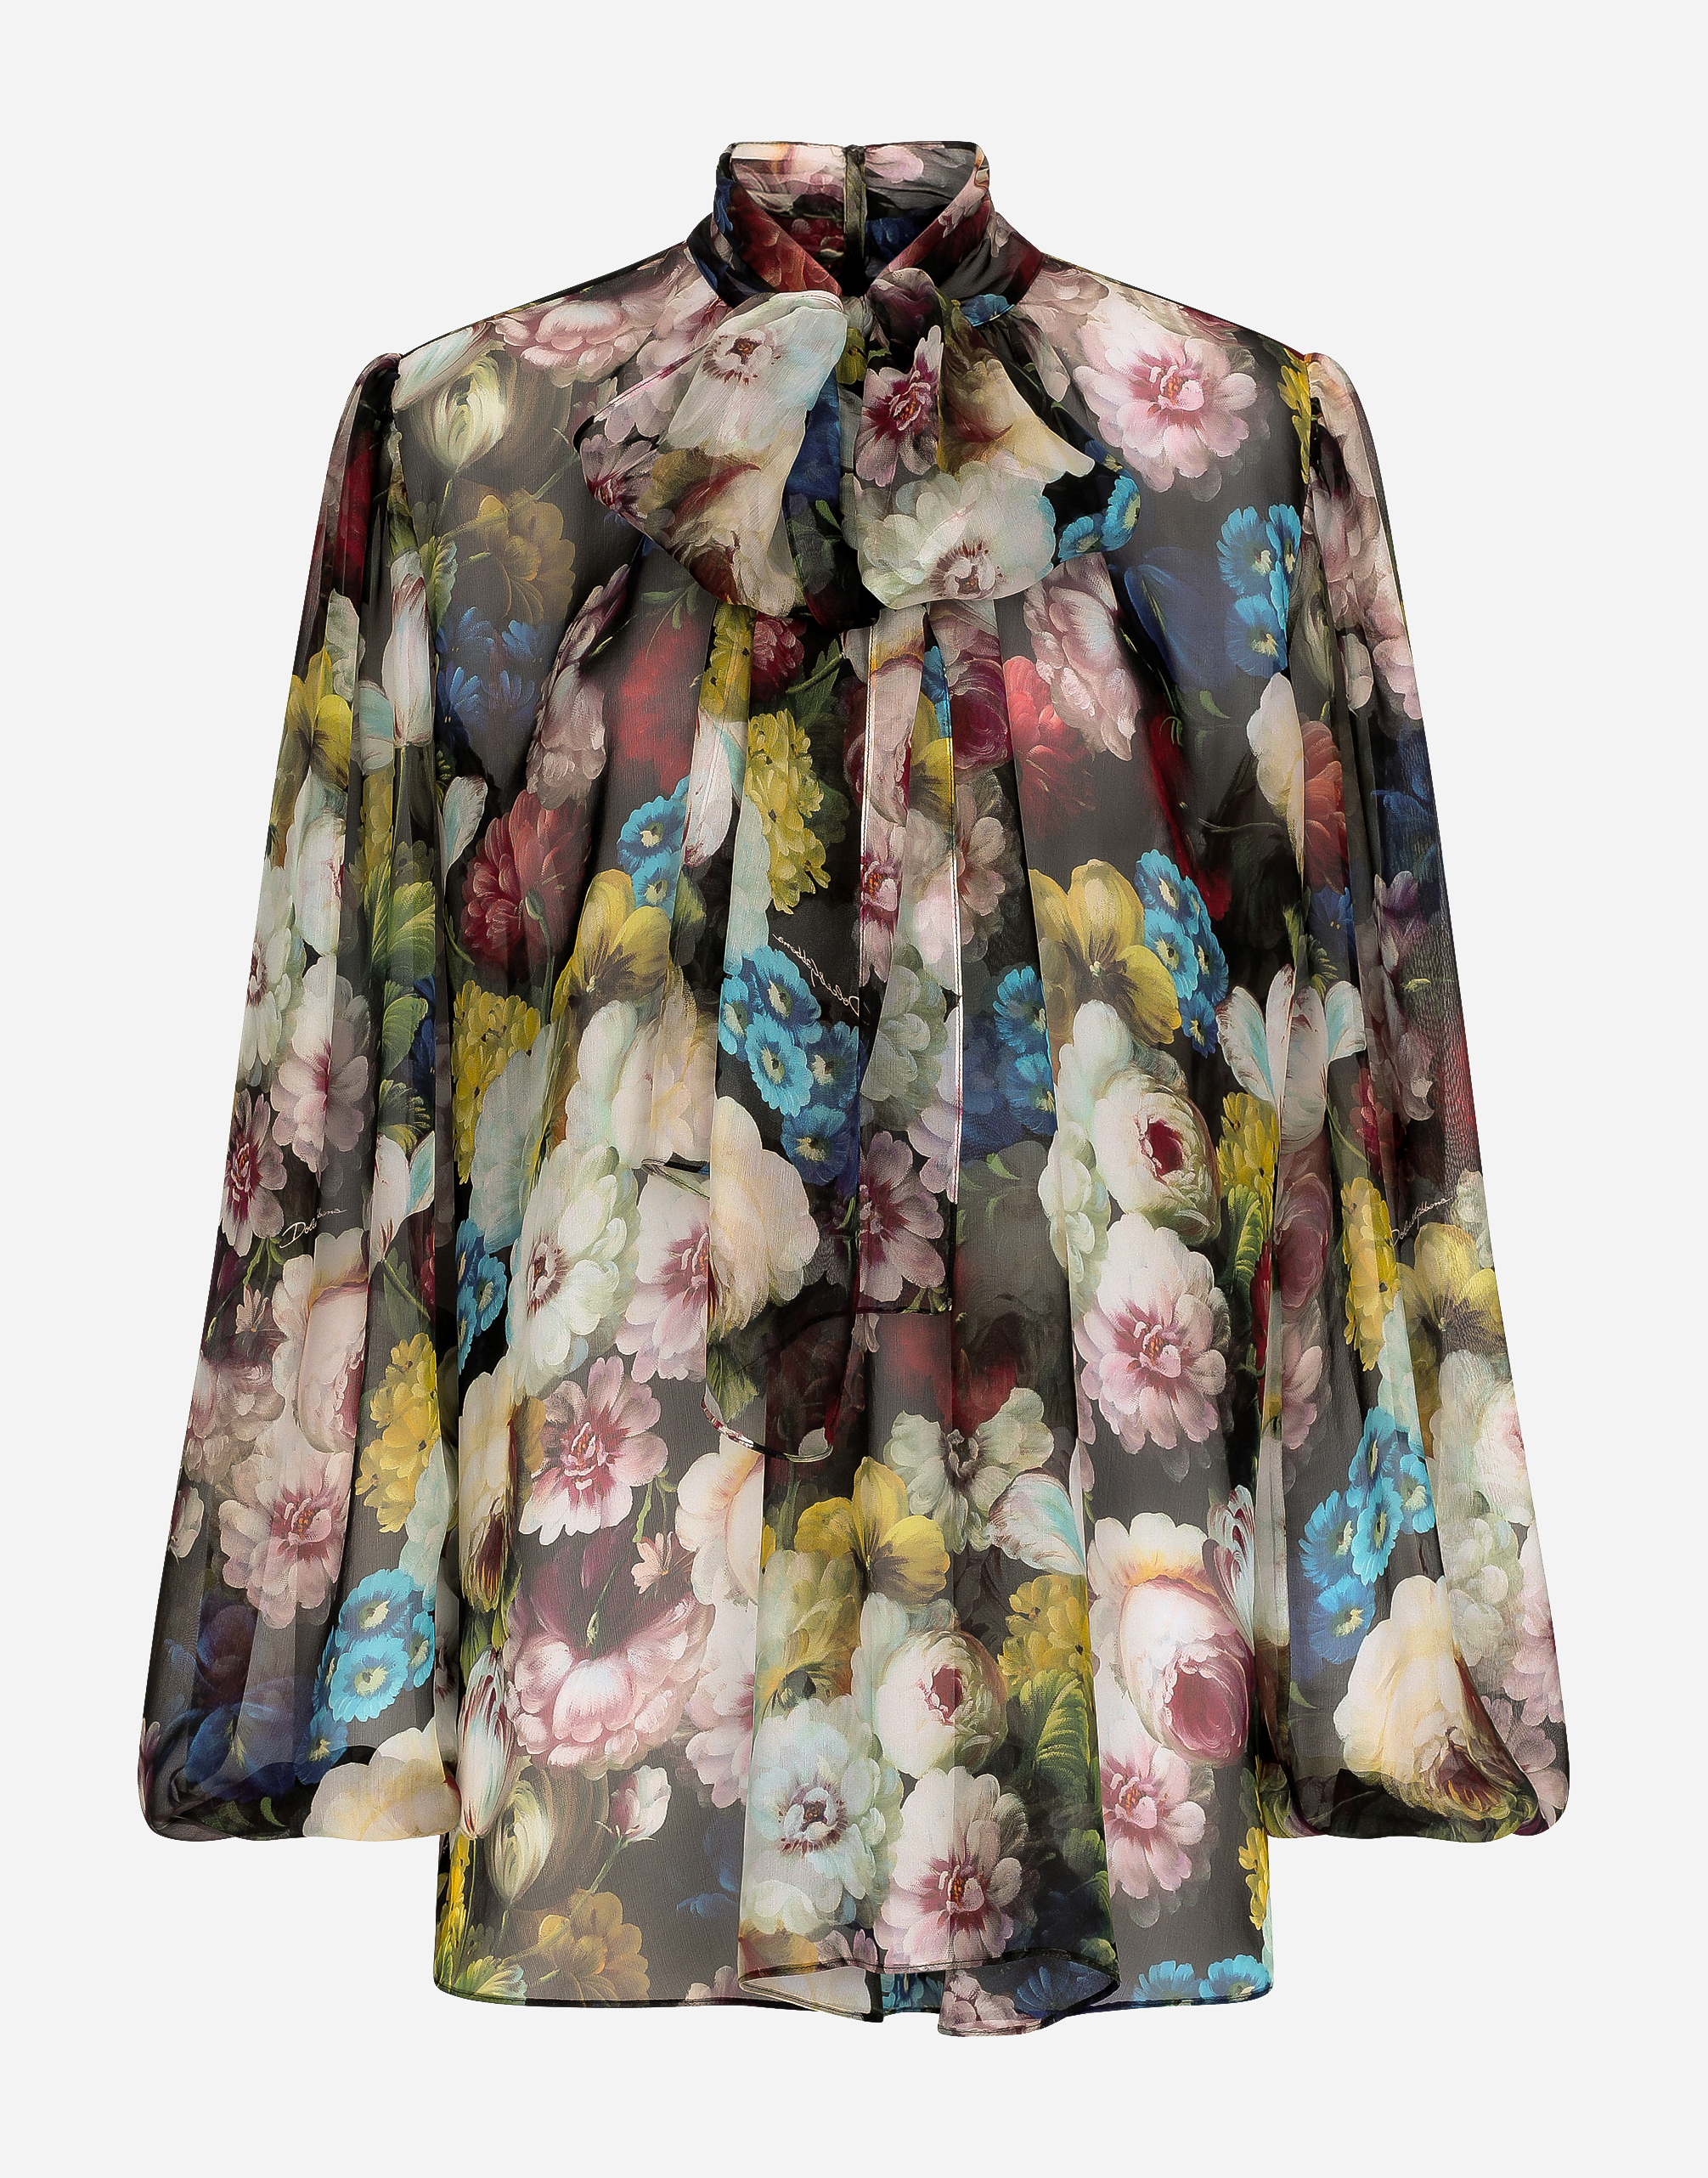 Chiffon shirt with nocturnal flower print